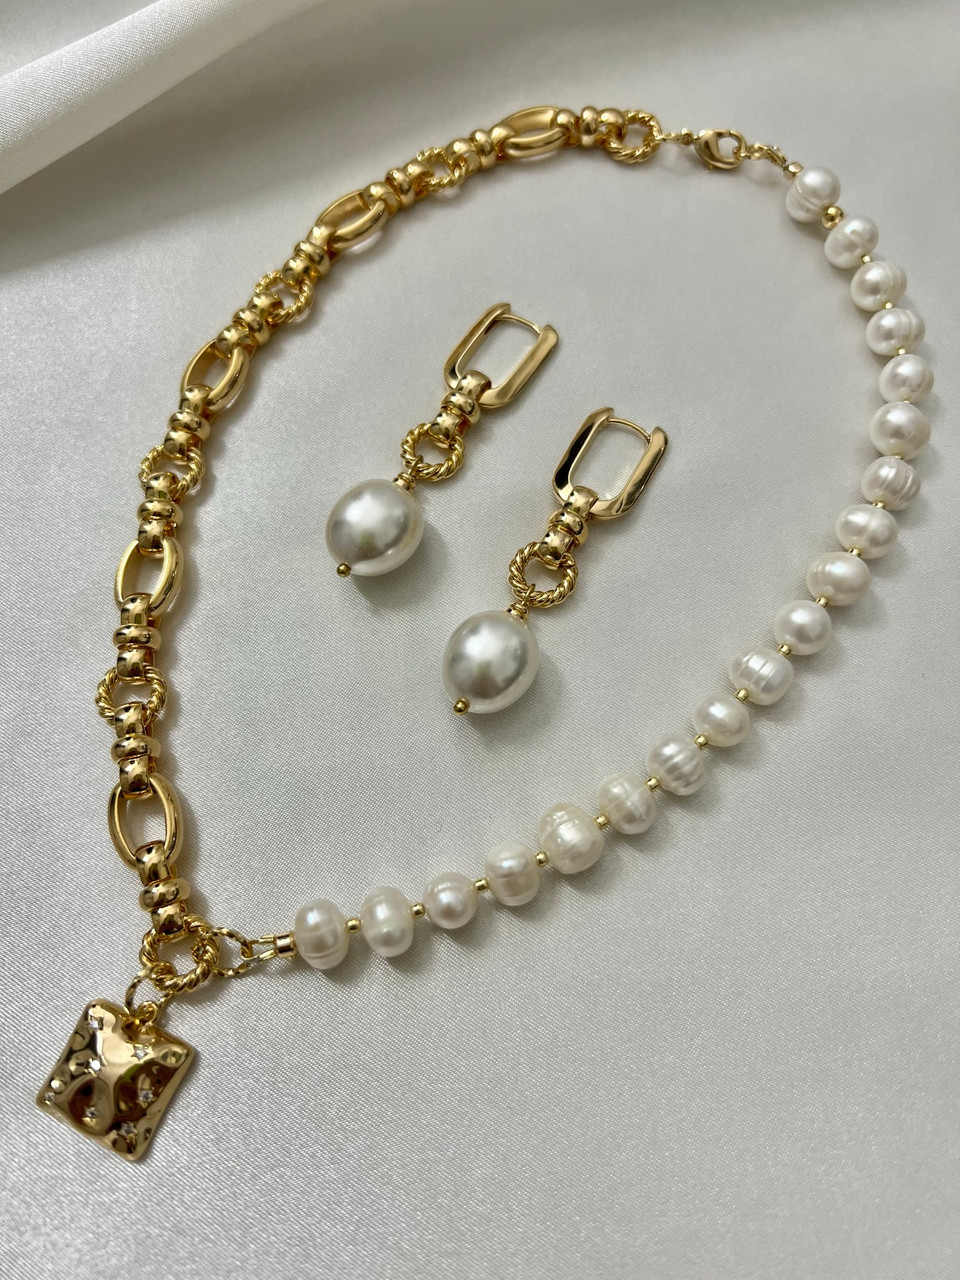 MICKLAT - Handmade unique half chain & half pearl necklace. real 18K gold  chain - organic natural freshwater pearls- 18K gold plated pendant - 18K  gold clasp hooks